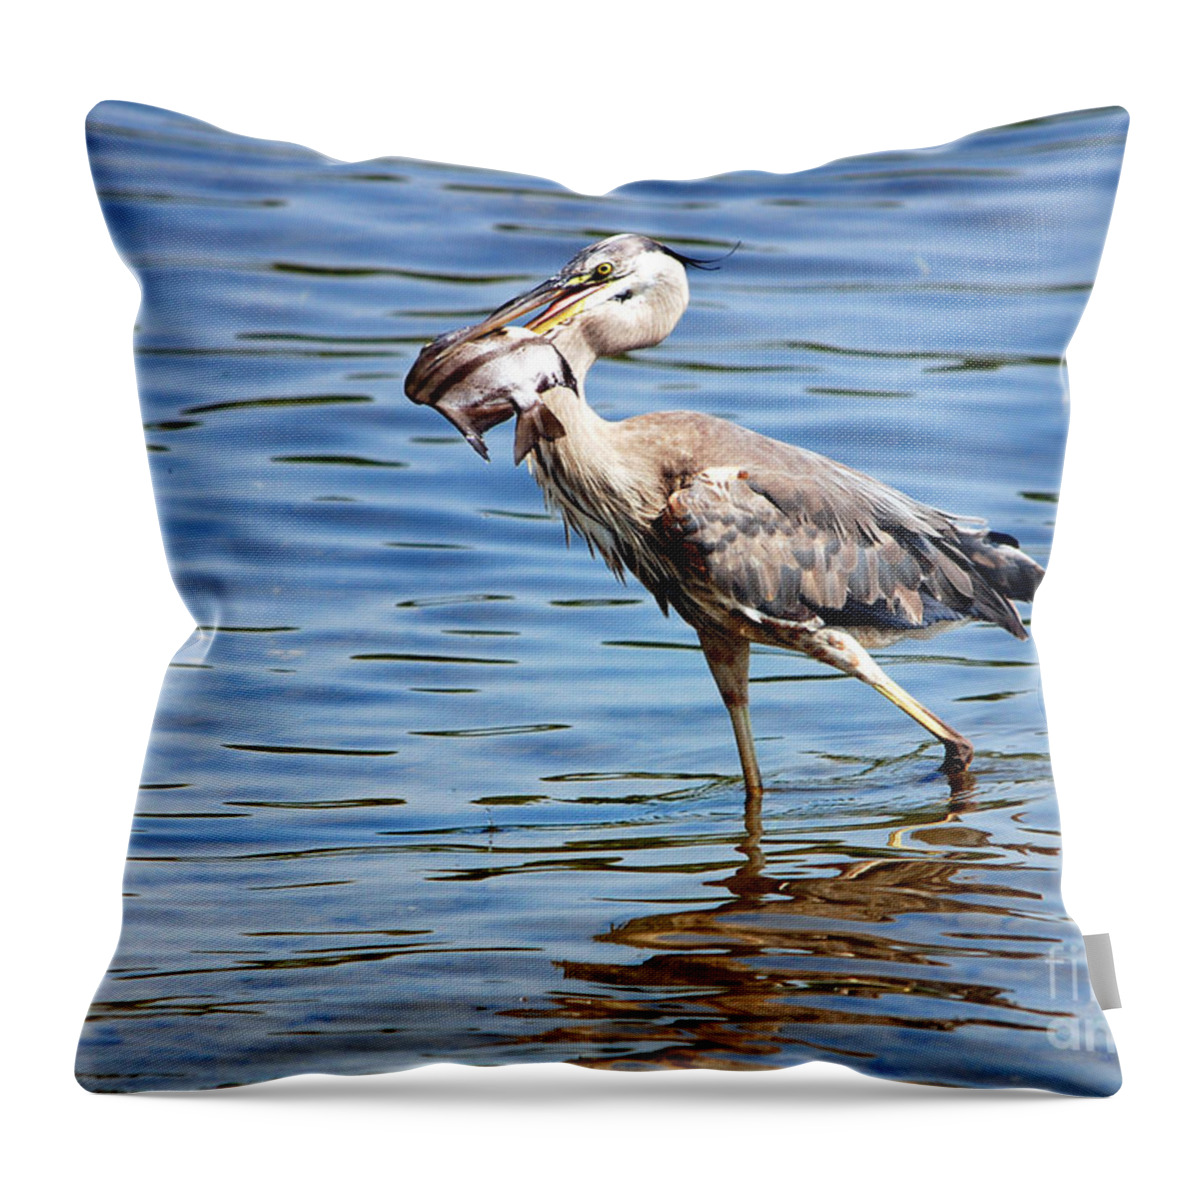  Anclote Gulf Park Throw Pillow featuring the photograph Blue Heron and Fish by John Greco